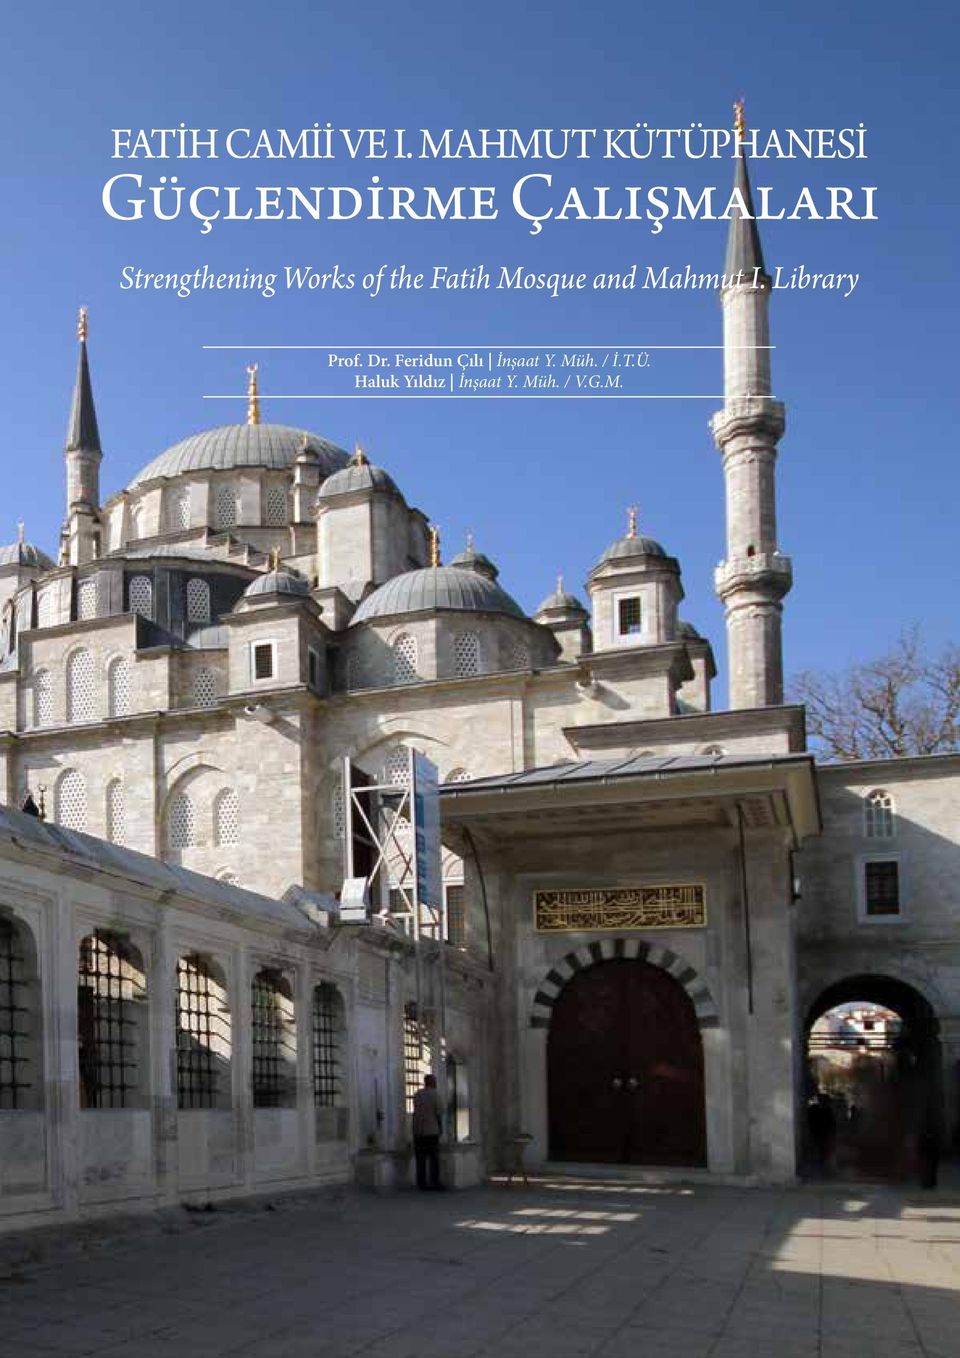 of the Fatih Mosque and Mahmut I. Library Prof. Dr.